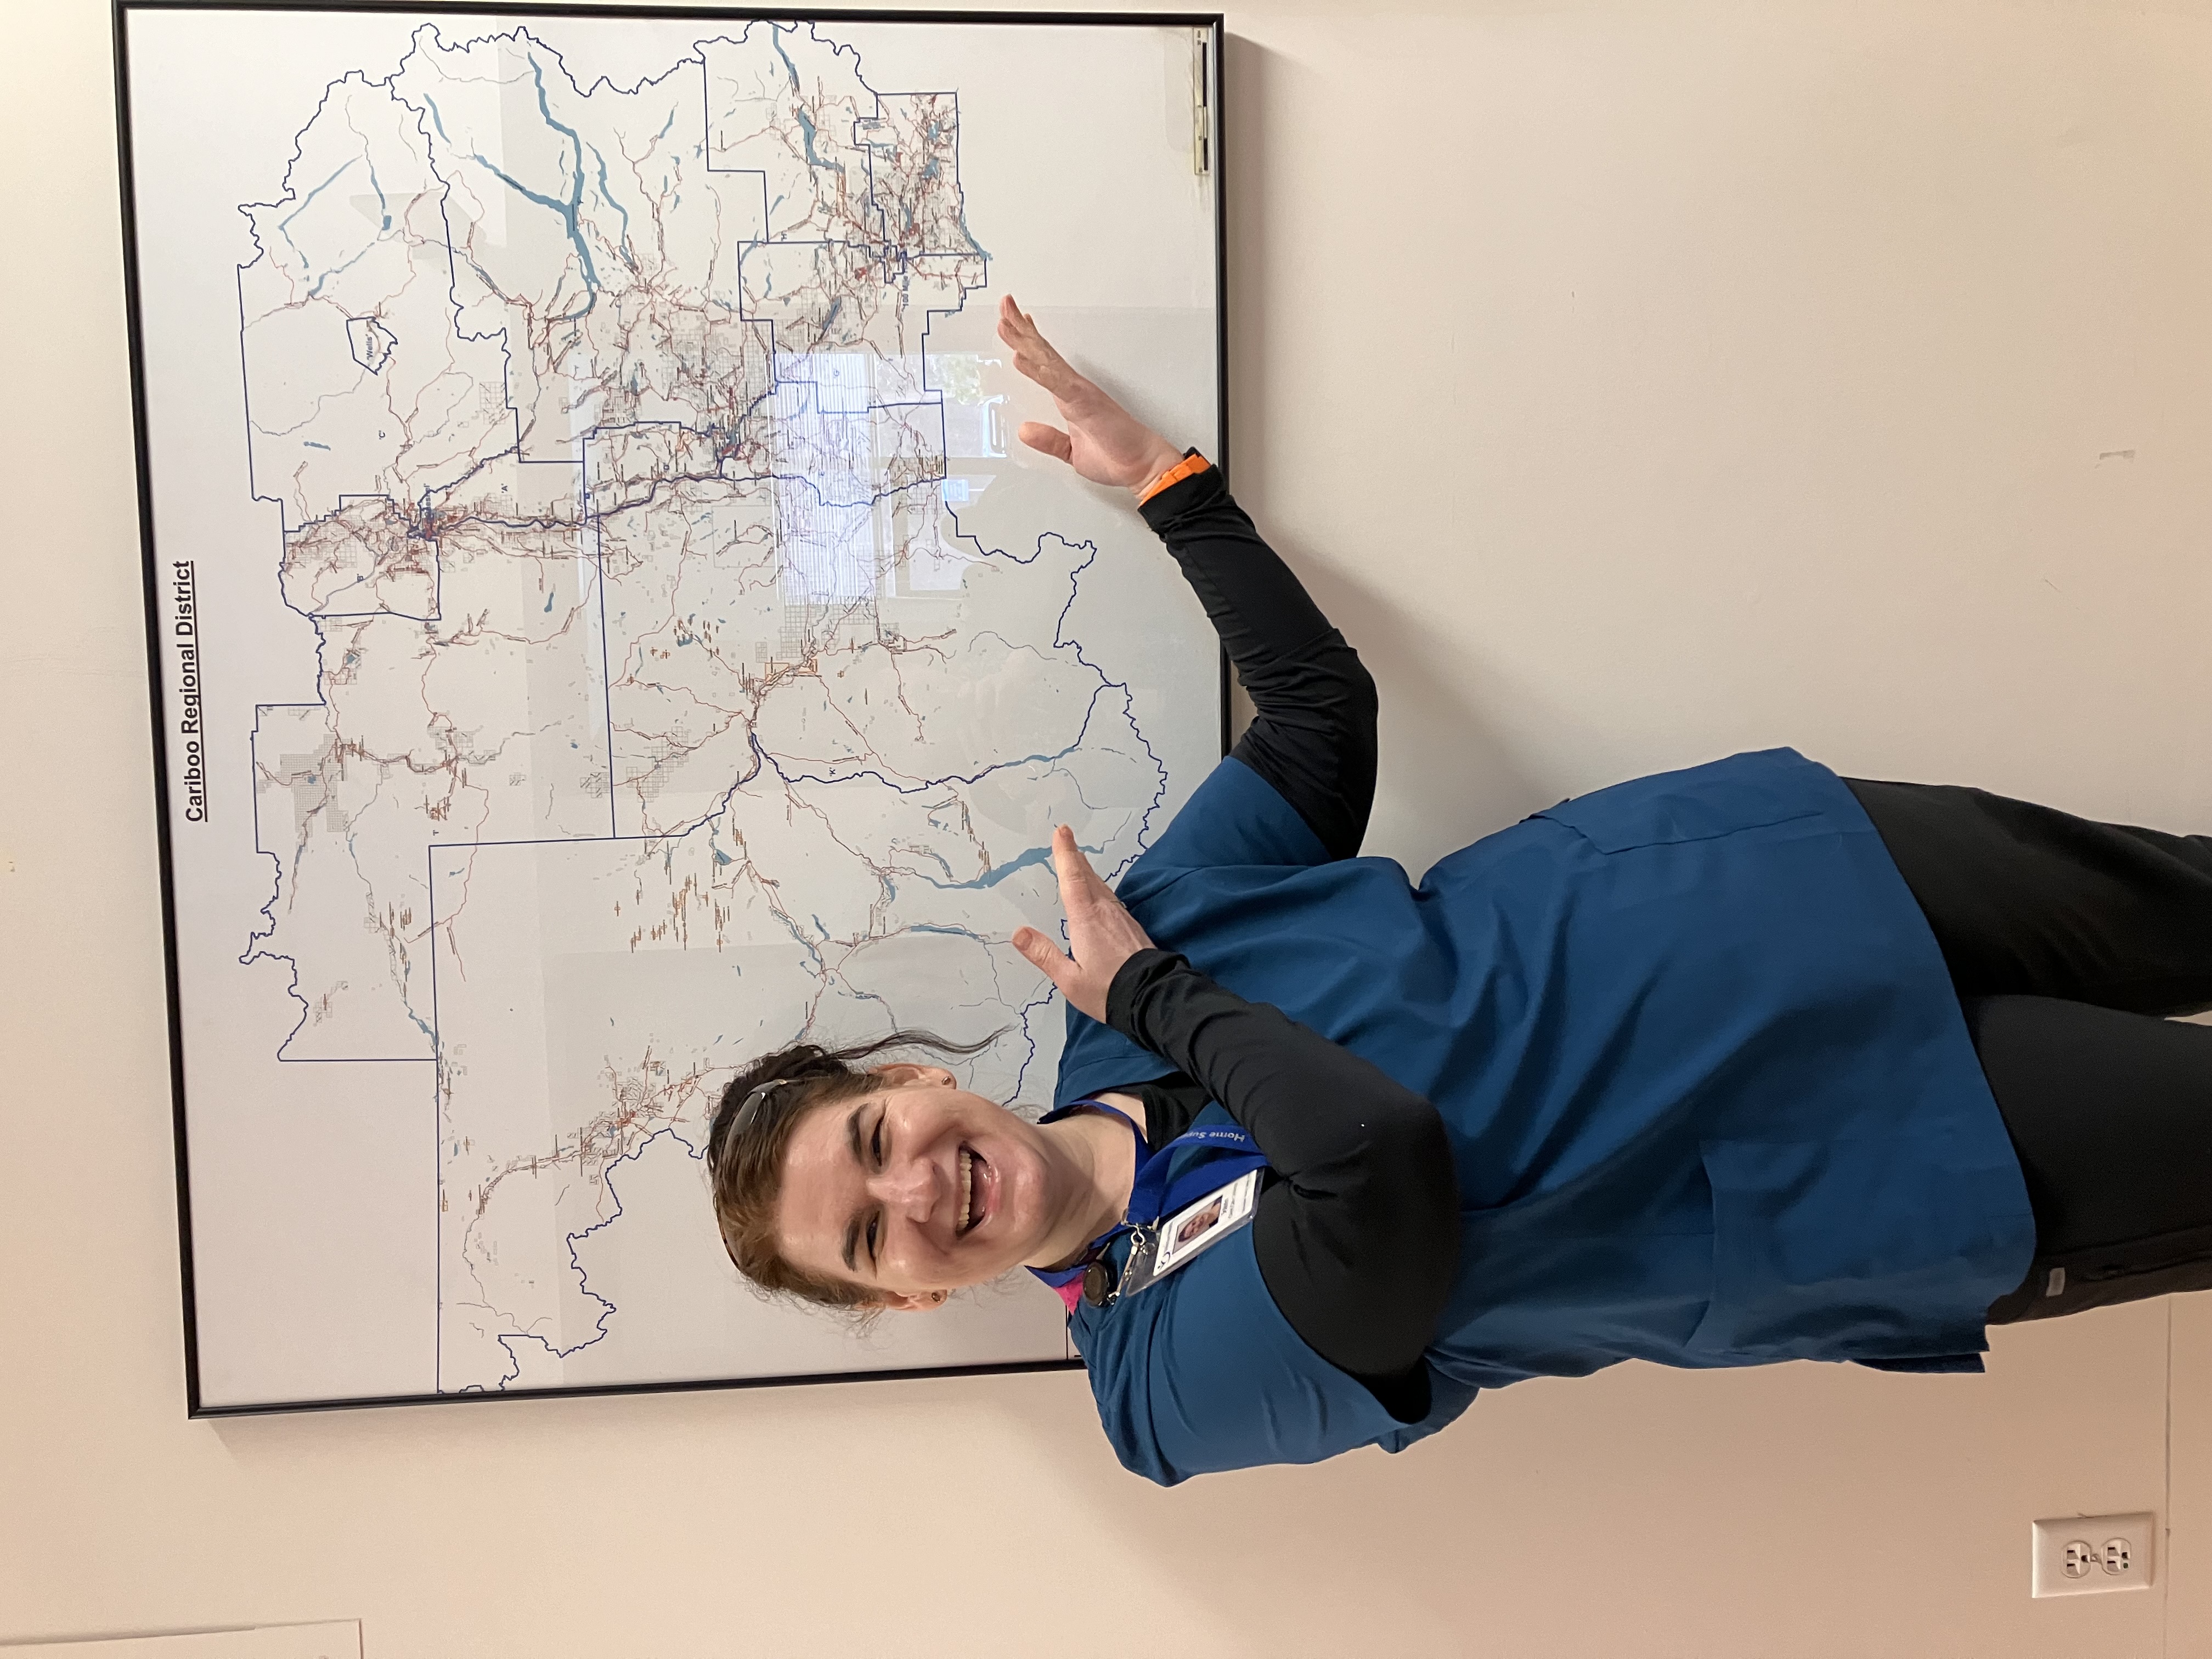 A laughing woman in blue medical clothes points at a map on a wall